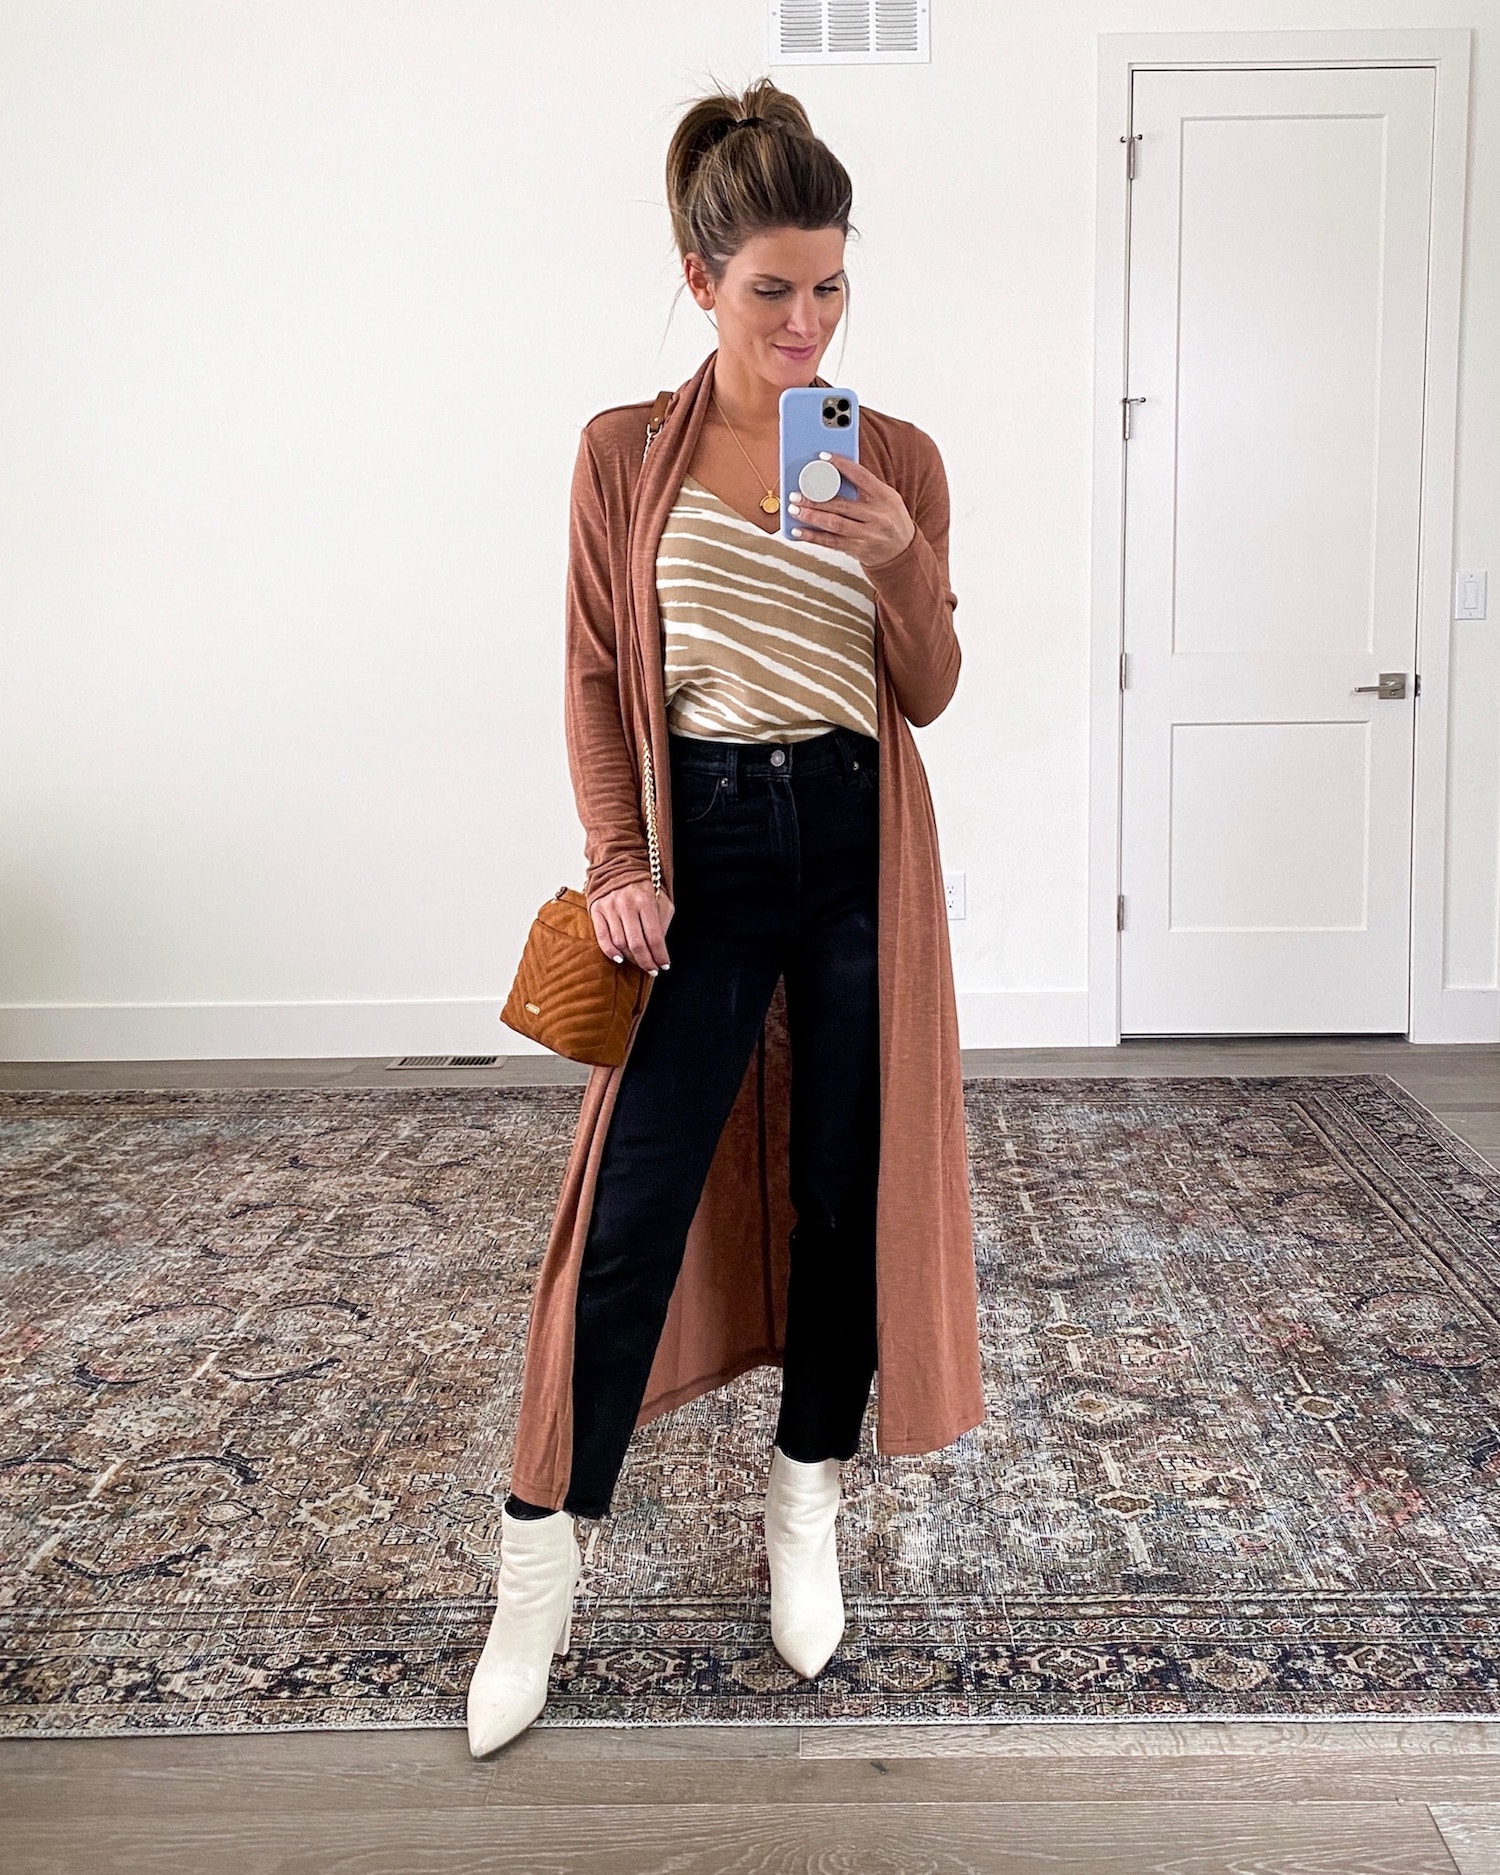 Brighton Keller wearing striped came, black jeans, duster and white booties